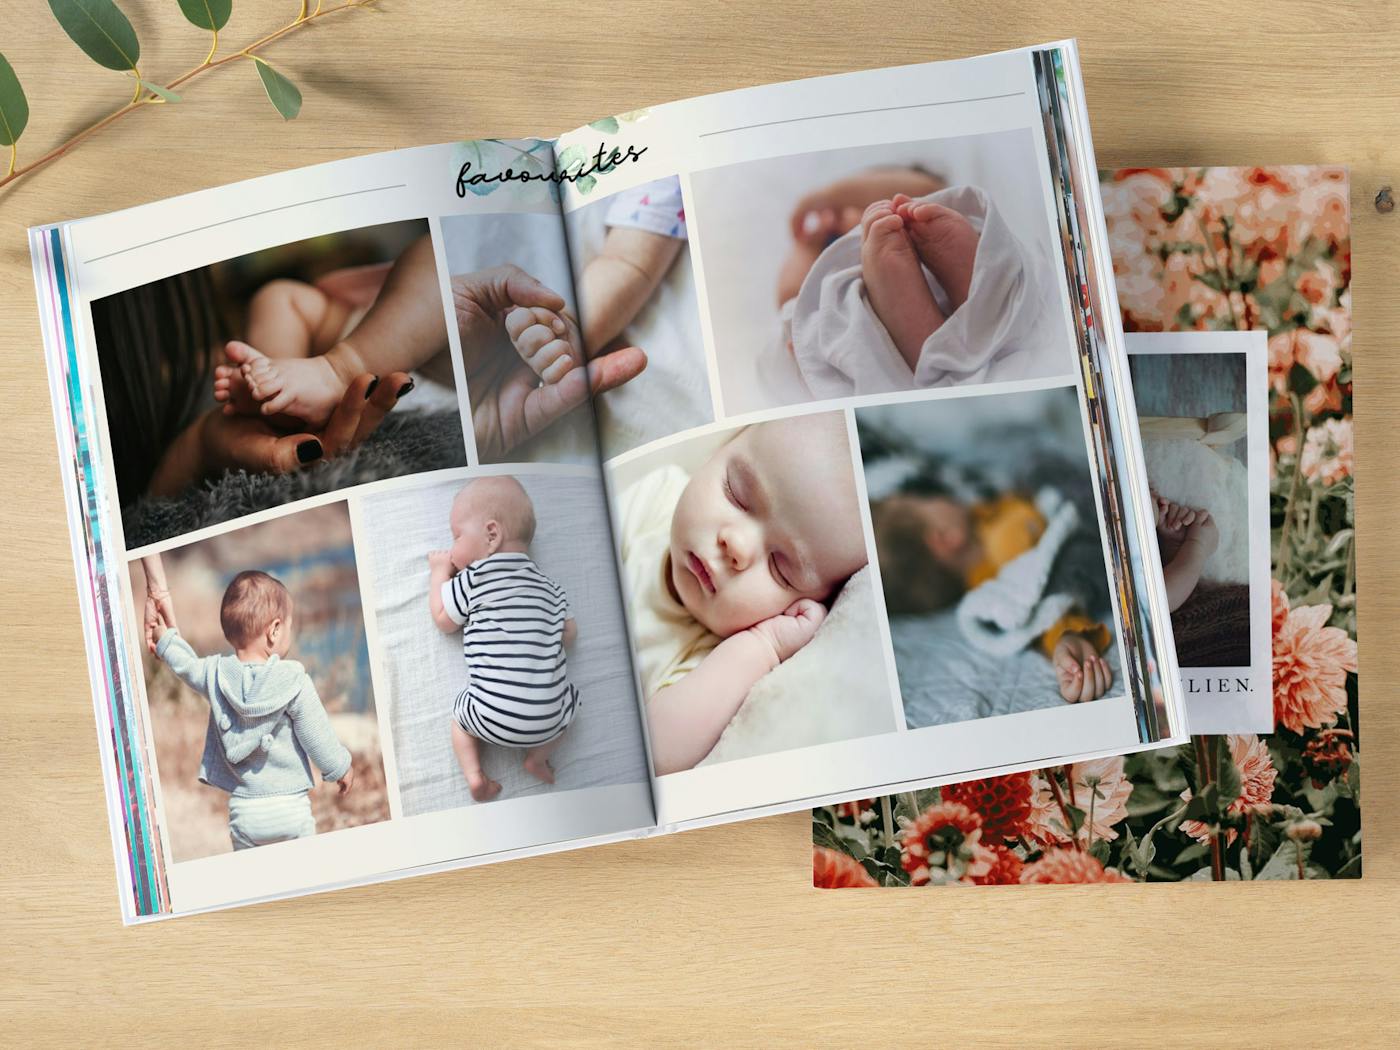 Baby Photo Album Made in No Time